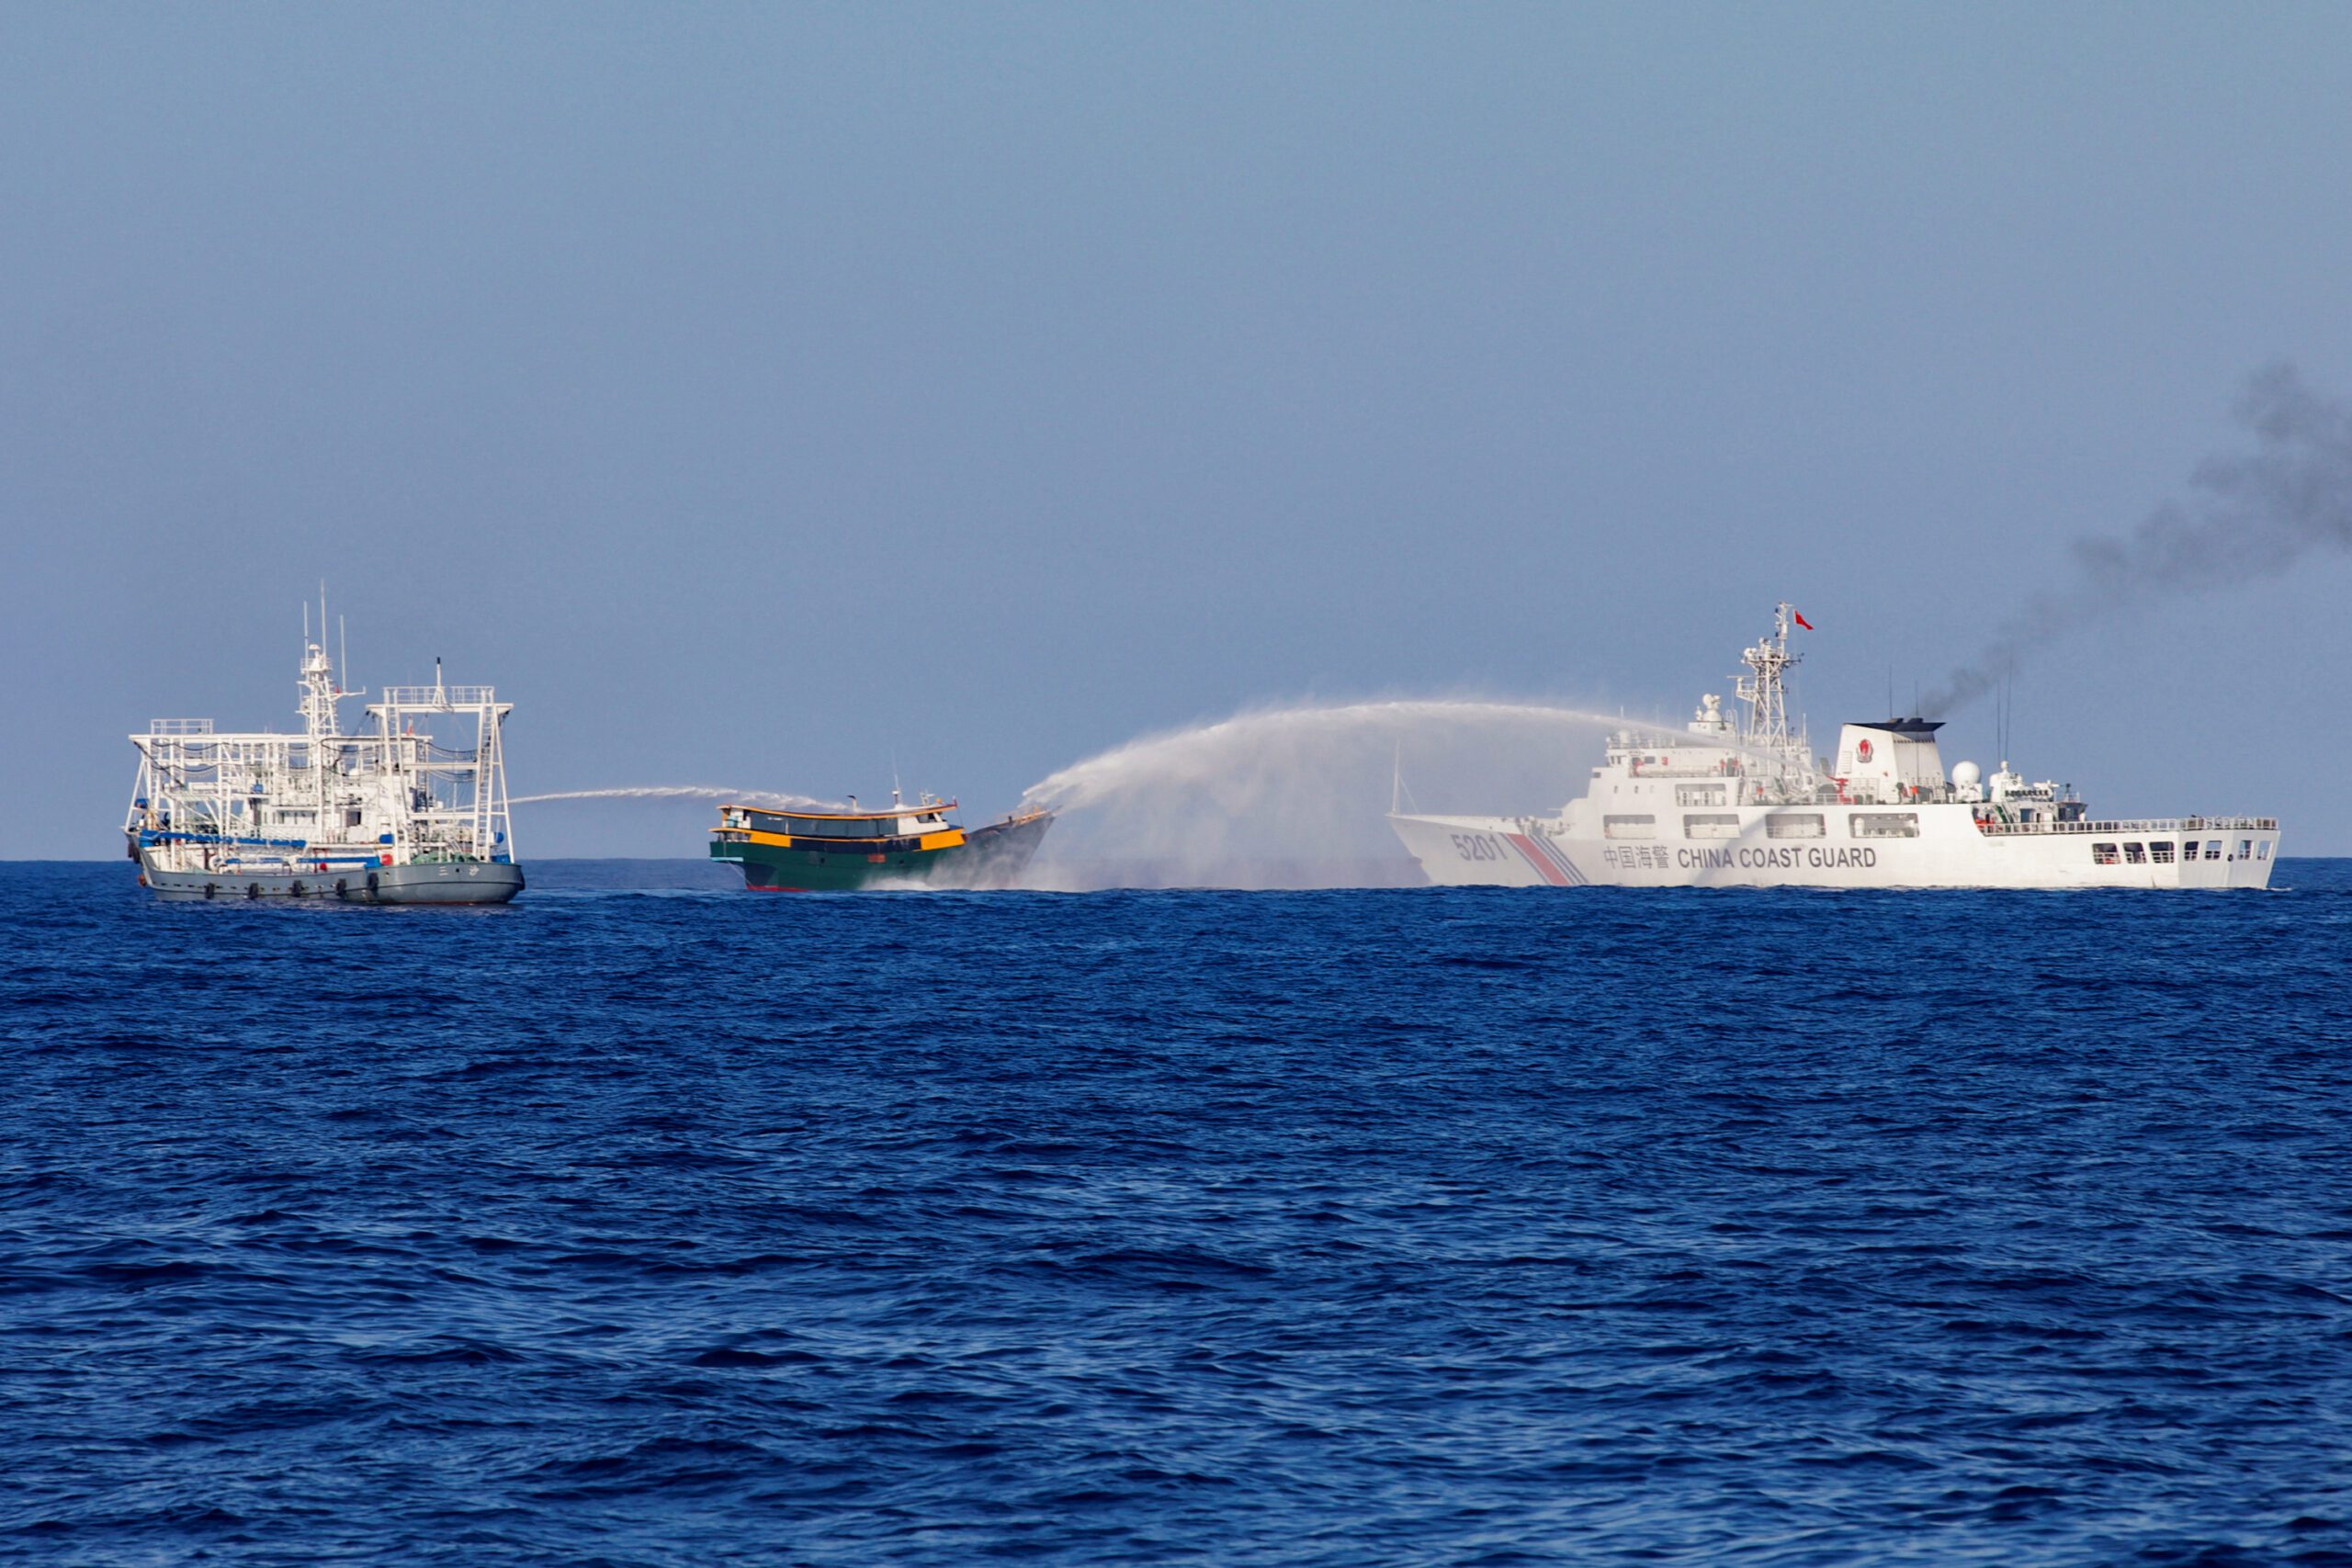 Chinese Coast Guard vessels fire water cannons towards a Philippine resupply vessel Unaizah May 4 on its way to a resupply mission at Second Thomas Shoal in the South China Sea. REUTERS/Adrian Portugal